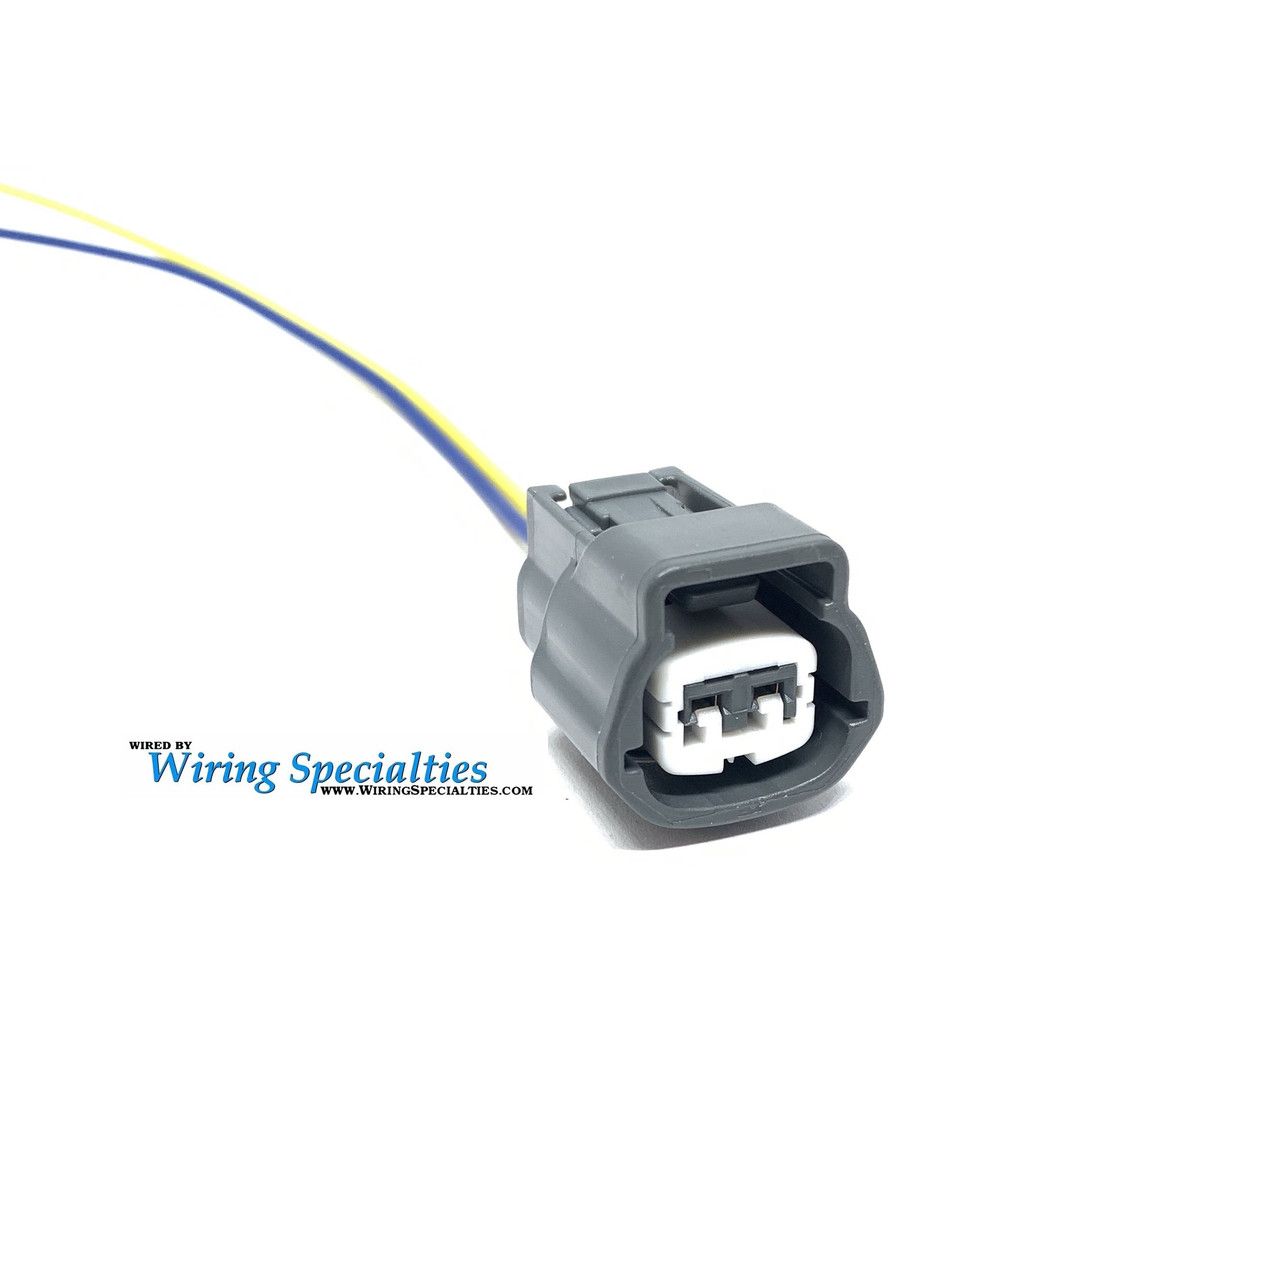 Wiring Specialties Coolant Water Temperature Sensor Connector w/ Pigtails - Nissan 300ZX 96 Z32 , 350Z, 370Z / Infiniti G35 G37